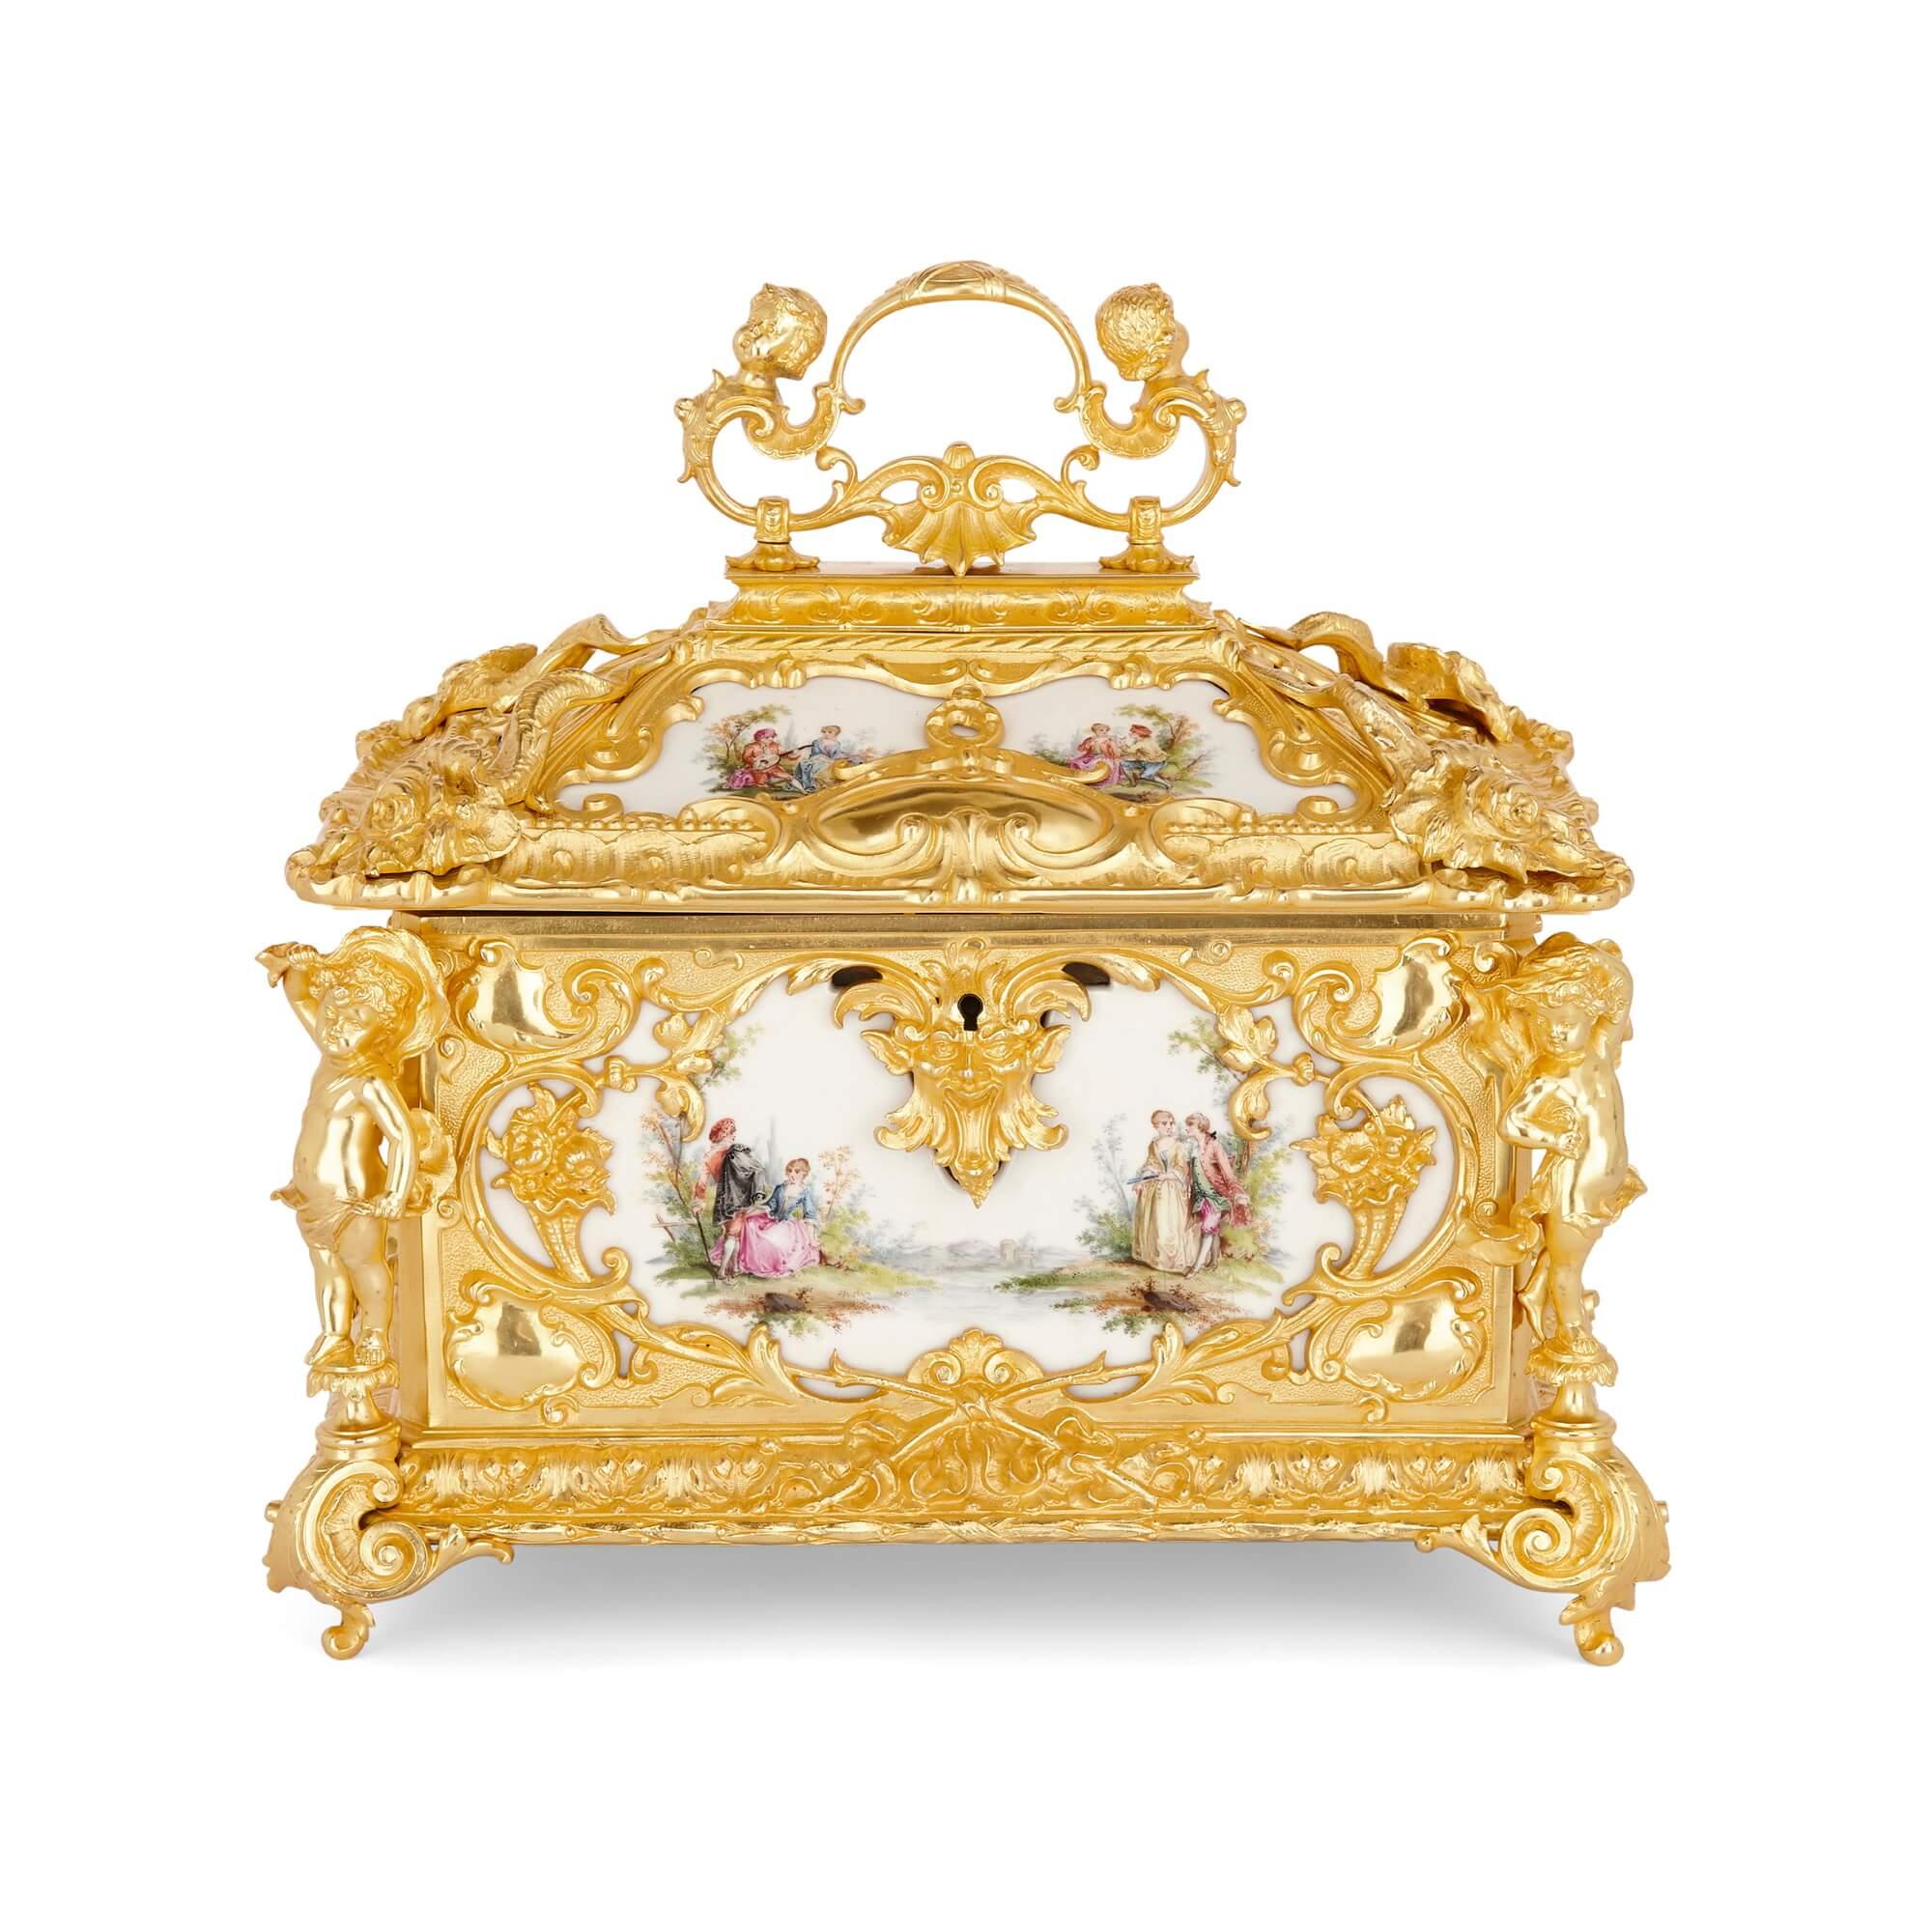 Large Rococo style gilt bronze and porcelain decorative casket.
German, late 19th Century
Measures: height 37cm, width 37cm, depth 27cm
Open: height 43cm, width 37cm, depth 42cm

This splendid German gilt bronze casket is designed in the Rococo